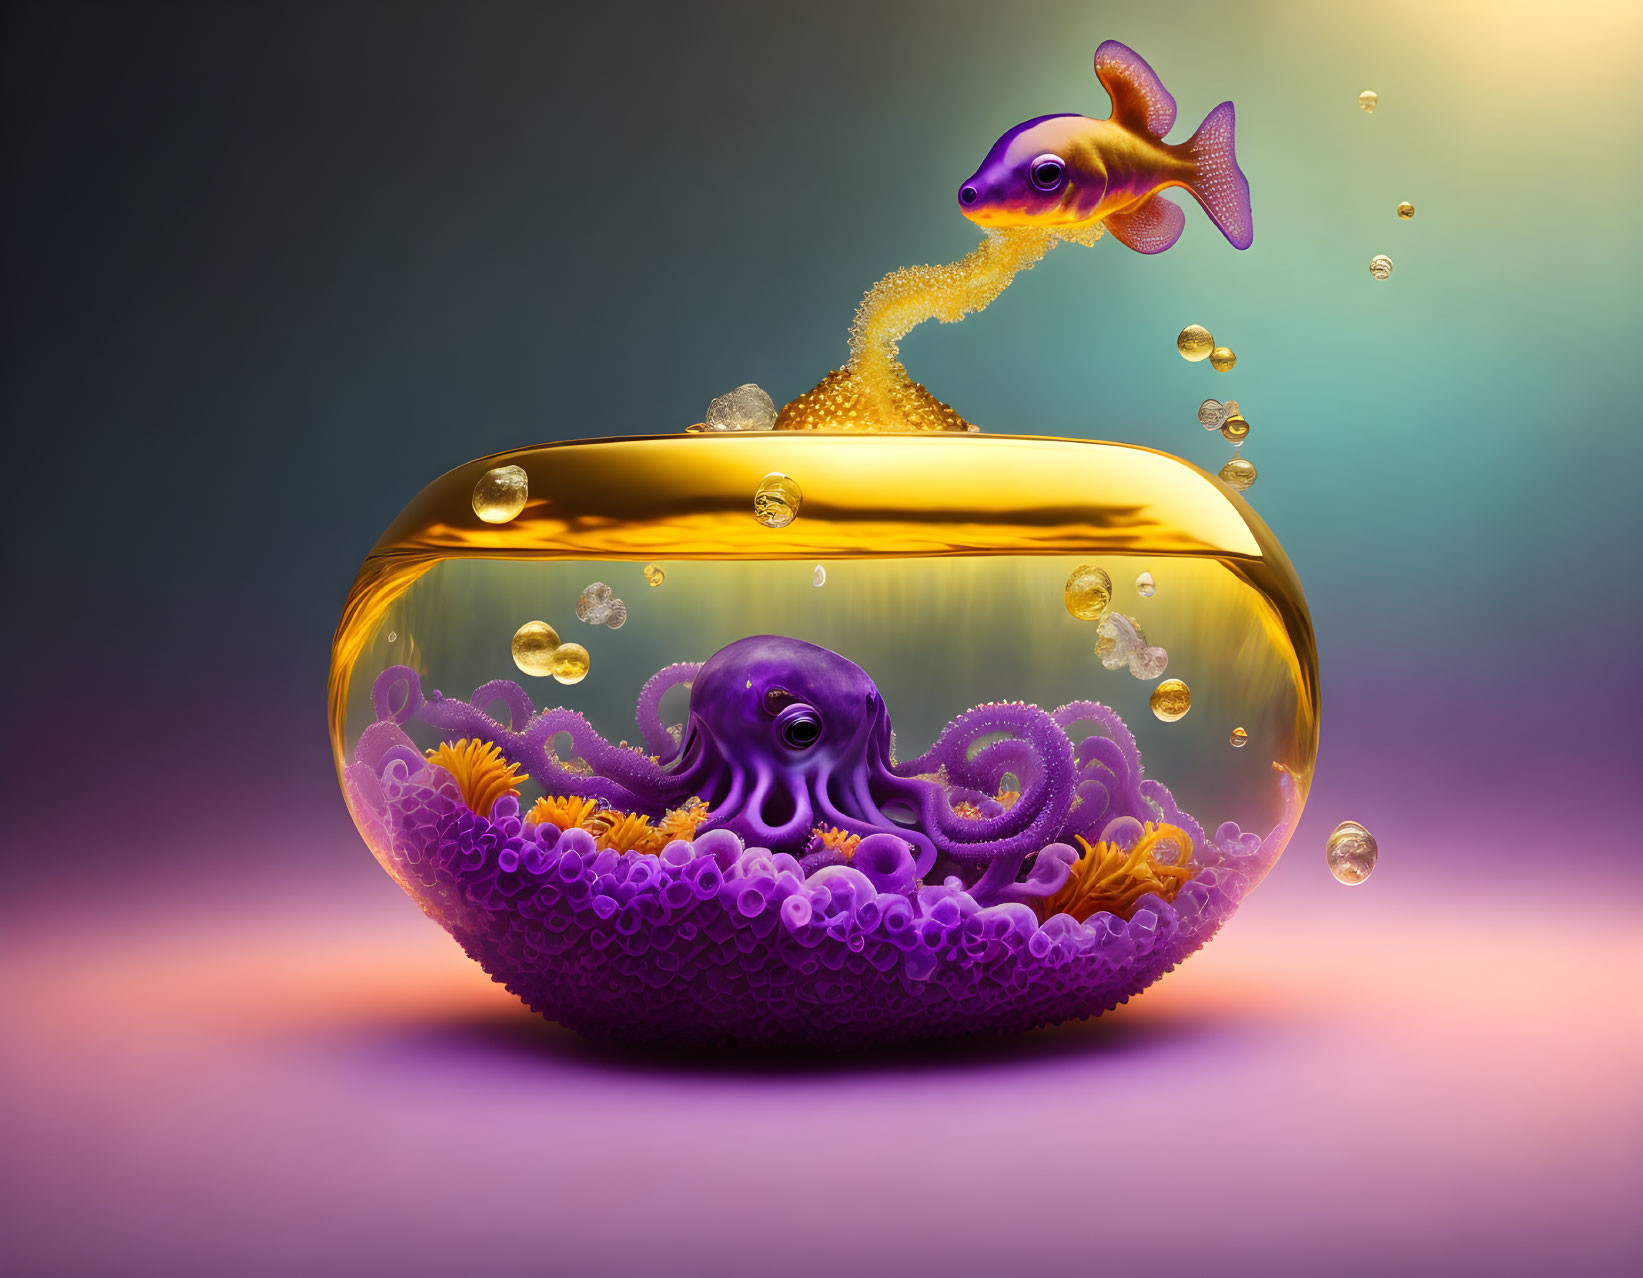 Colorful Fish Jumping Out of Bowl with Octopus and Anemones Underwater